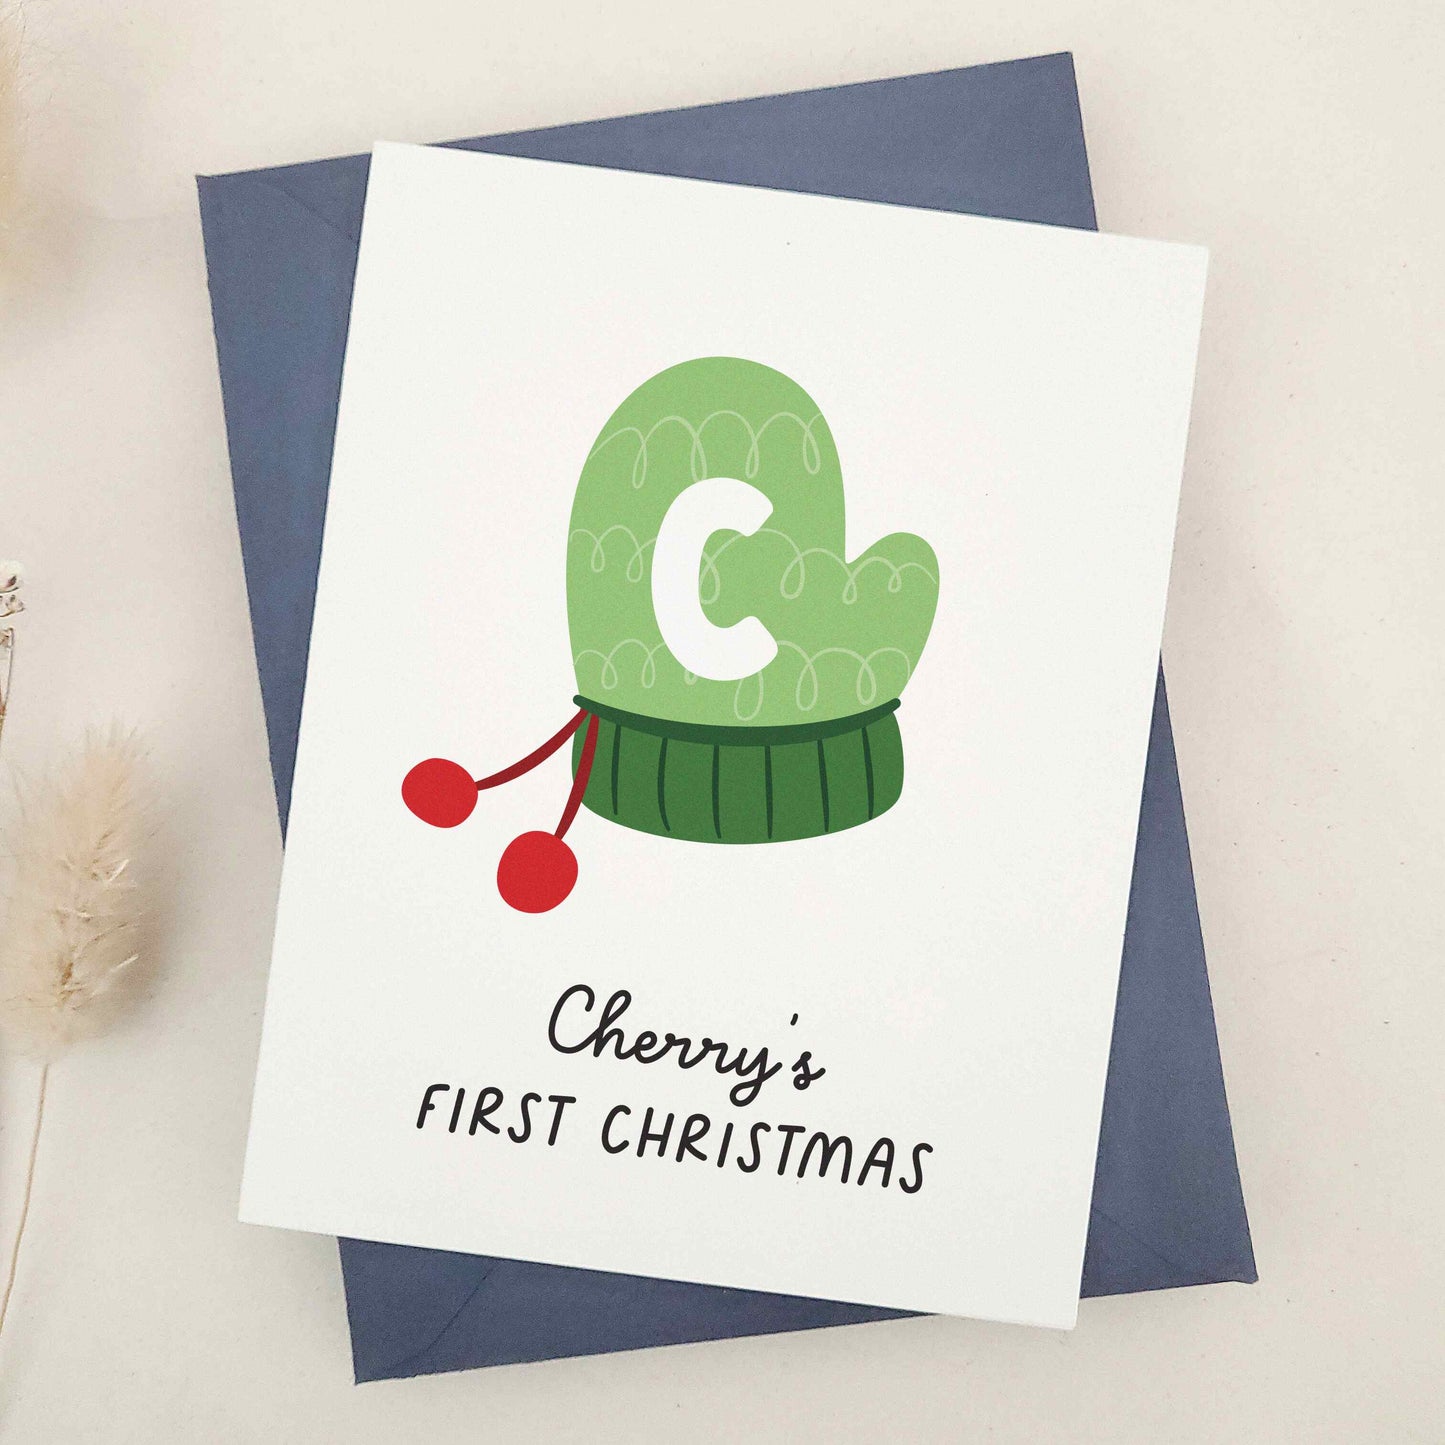 Share the happiness and joy of the season with a heartwarming design featuring a cozy green winter mitten adorned with a playful initial, perfect for marking a little one's introduction to time-honored holiday traditions. This delightful card captures the essence of a child's first experience with the magic of yuletide, making it a cherished keepsake for years to come.